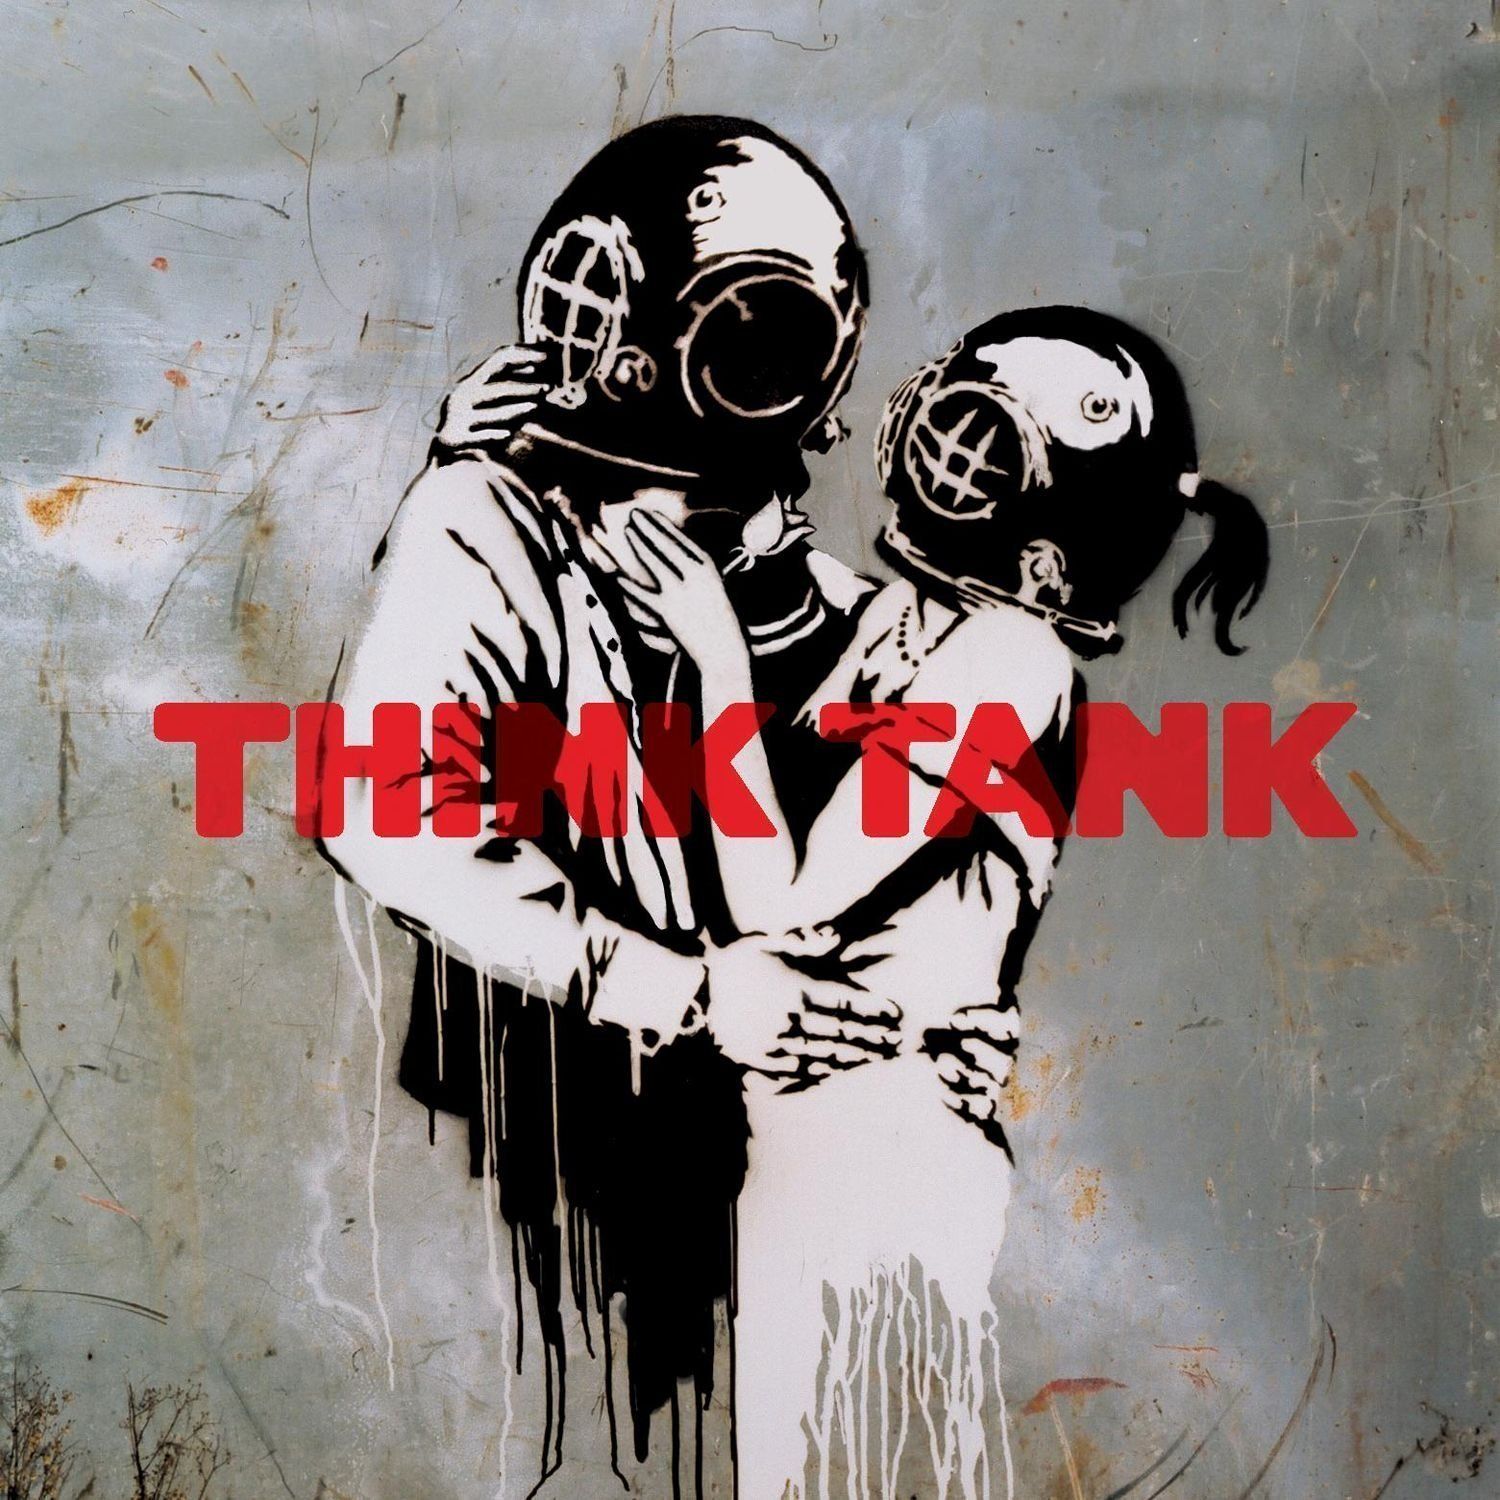 BANKSY Banksy (after)

THINK TANK, 2003

Printed on both sides of a vinyl cover.&hellip;